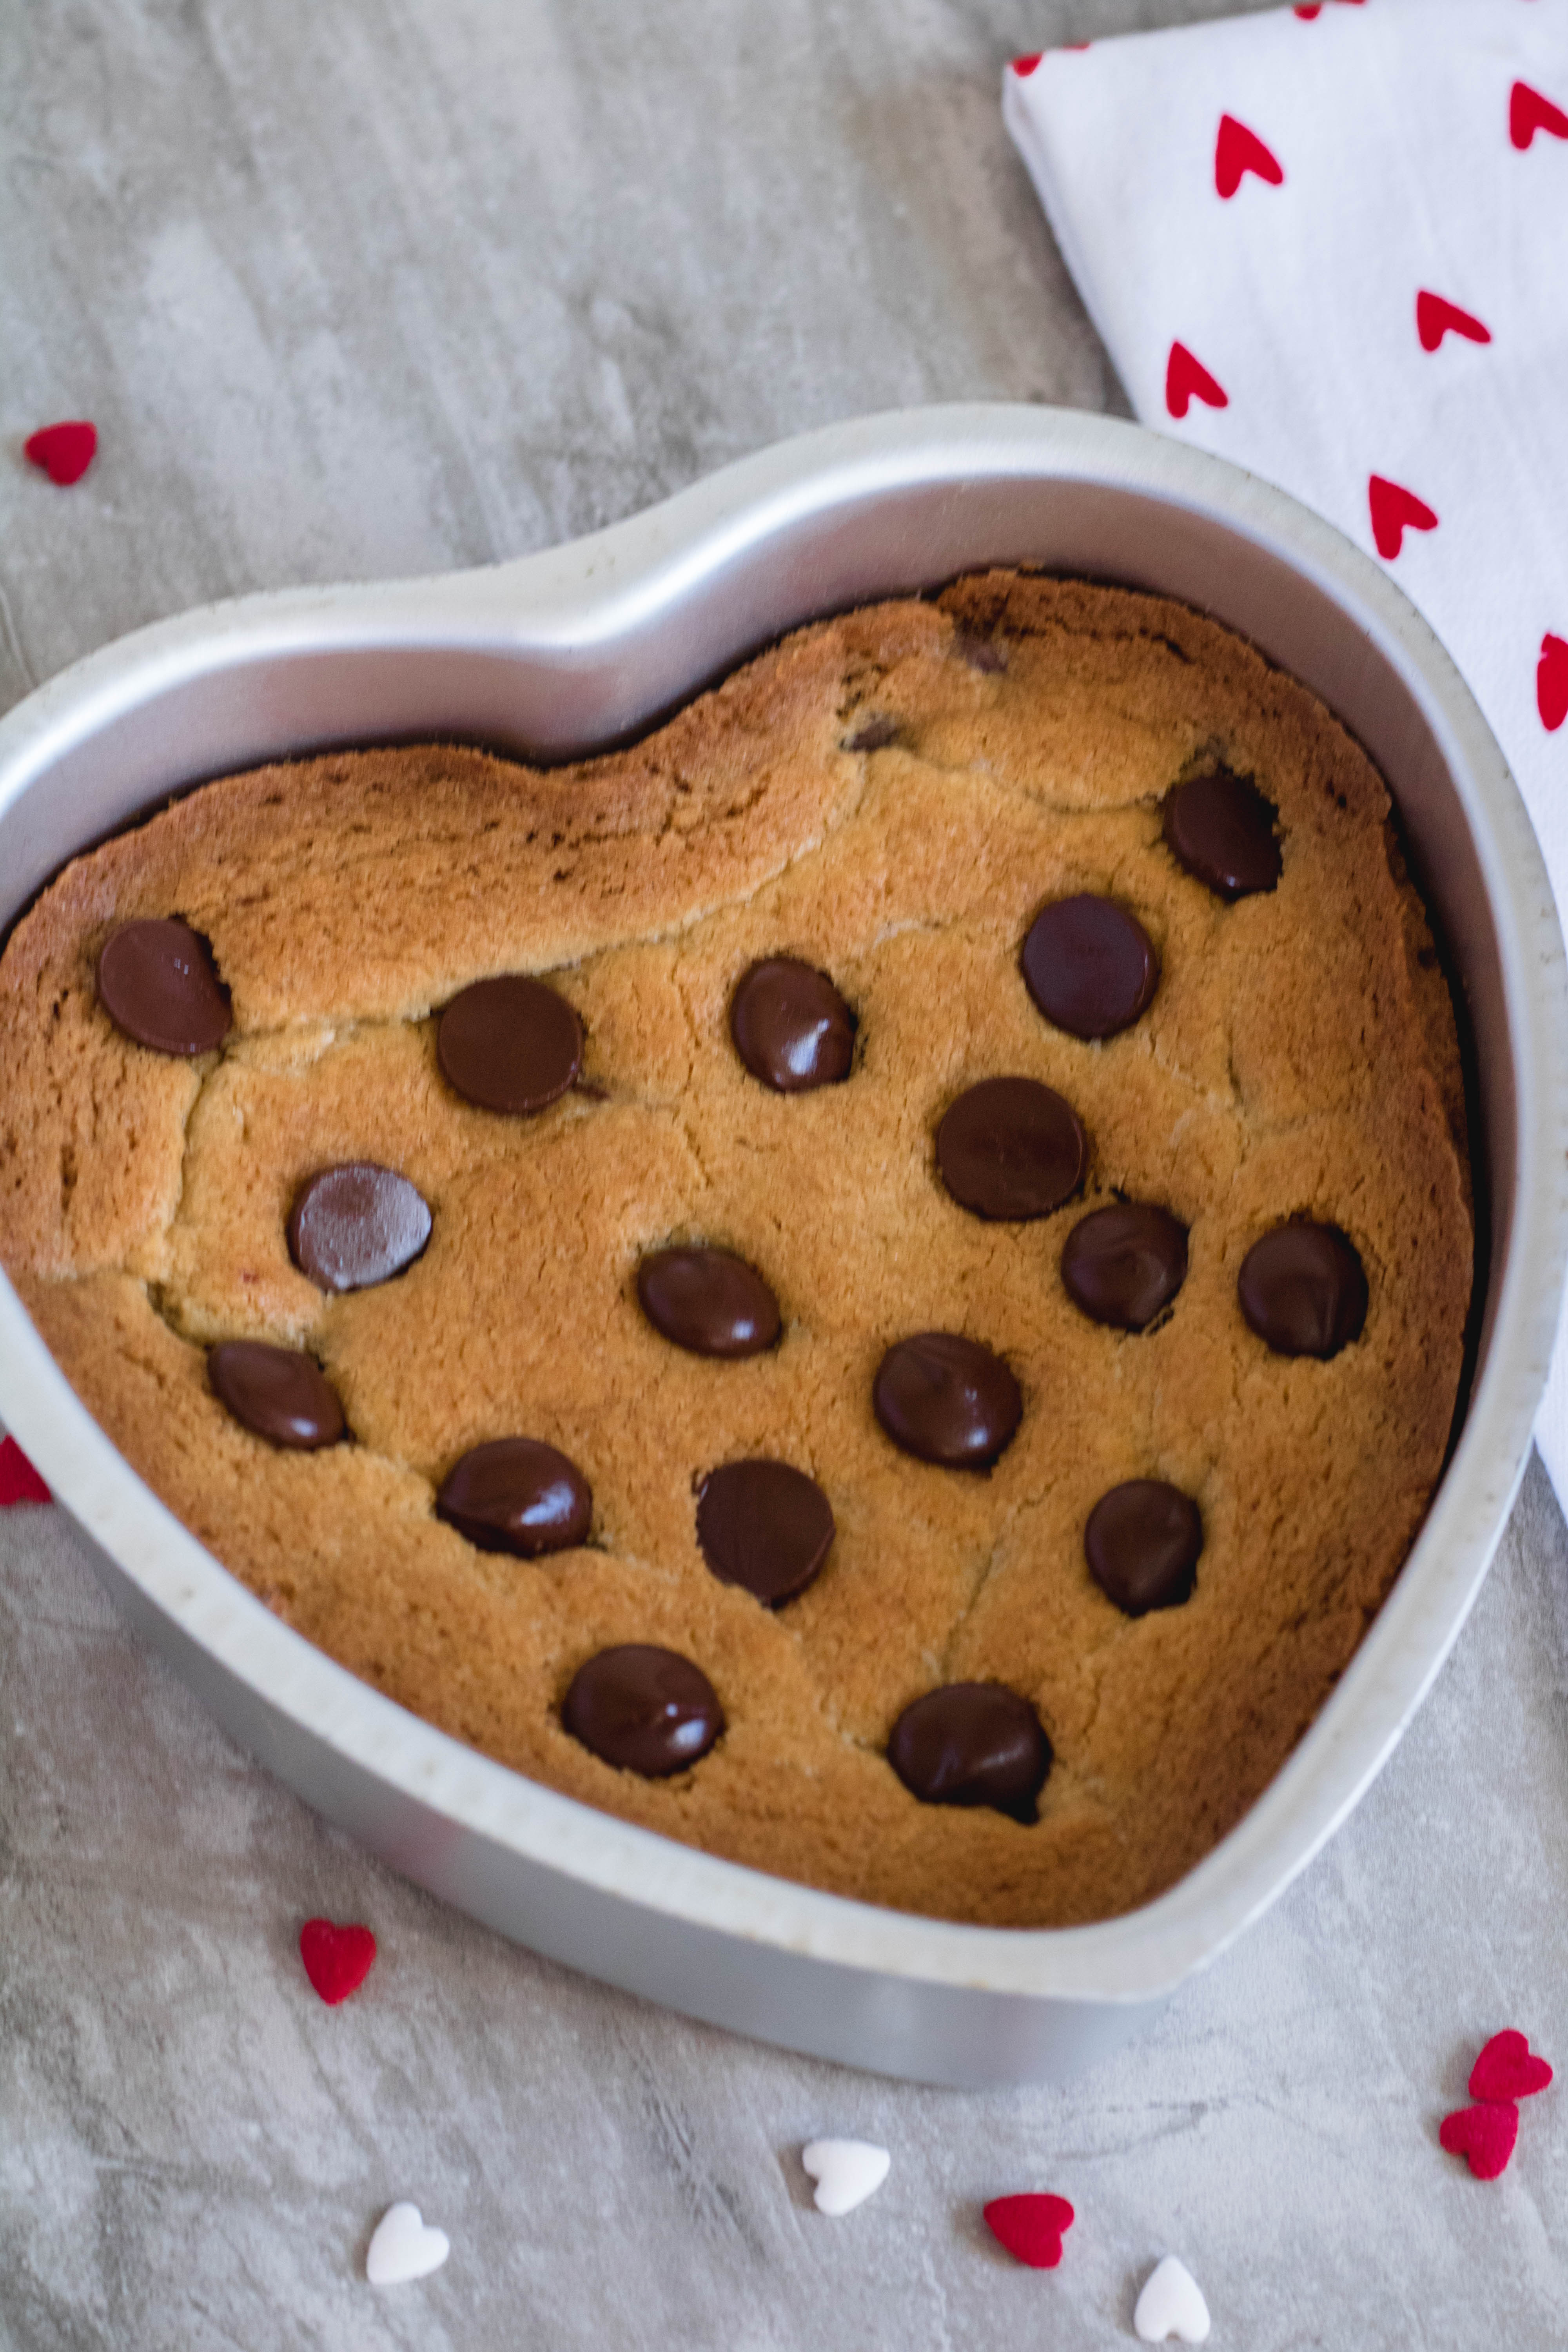 baked cookie cake for valentine's day